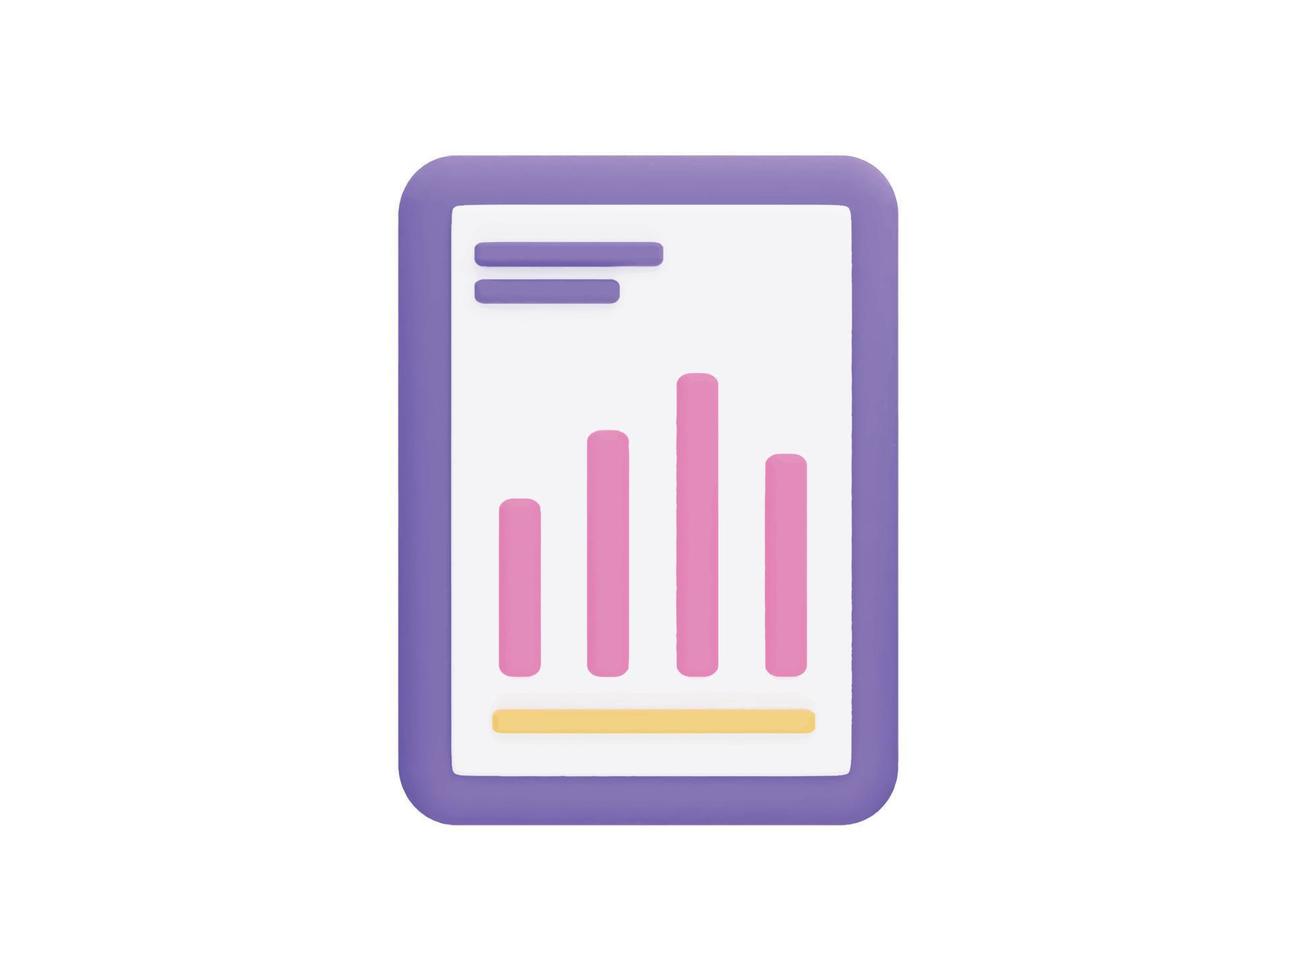 analyzing data concept with 3d vector icon cartoon minimal style